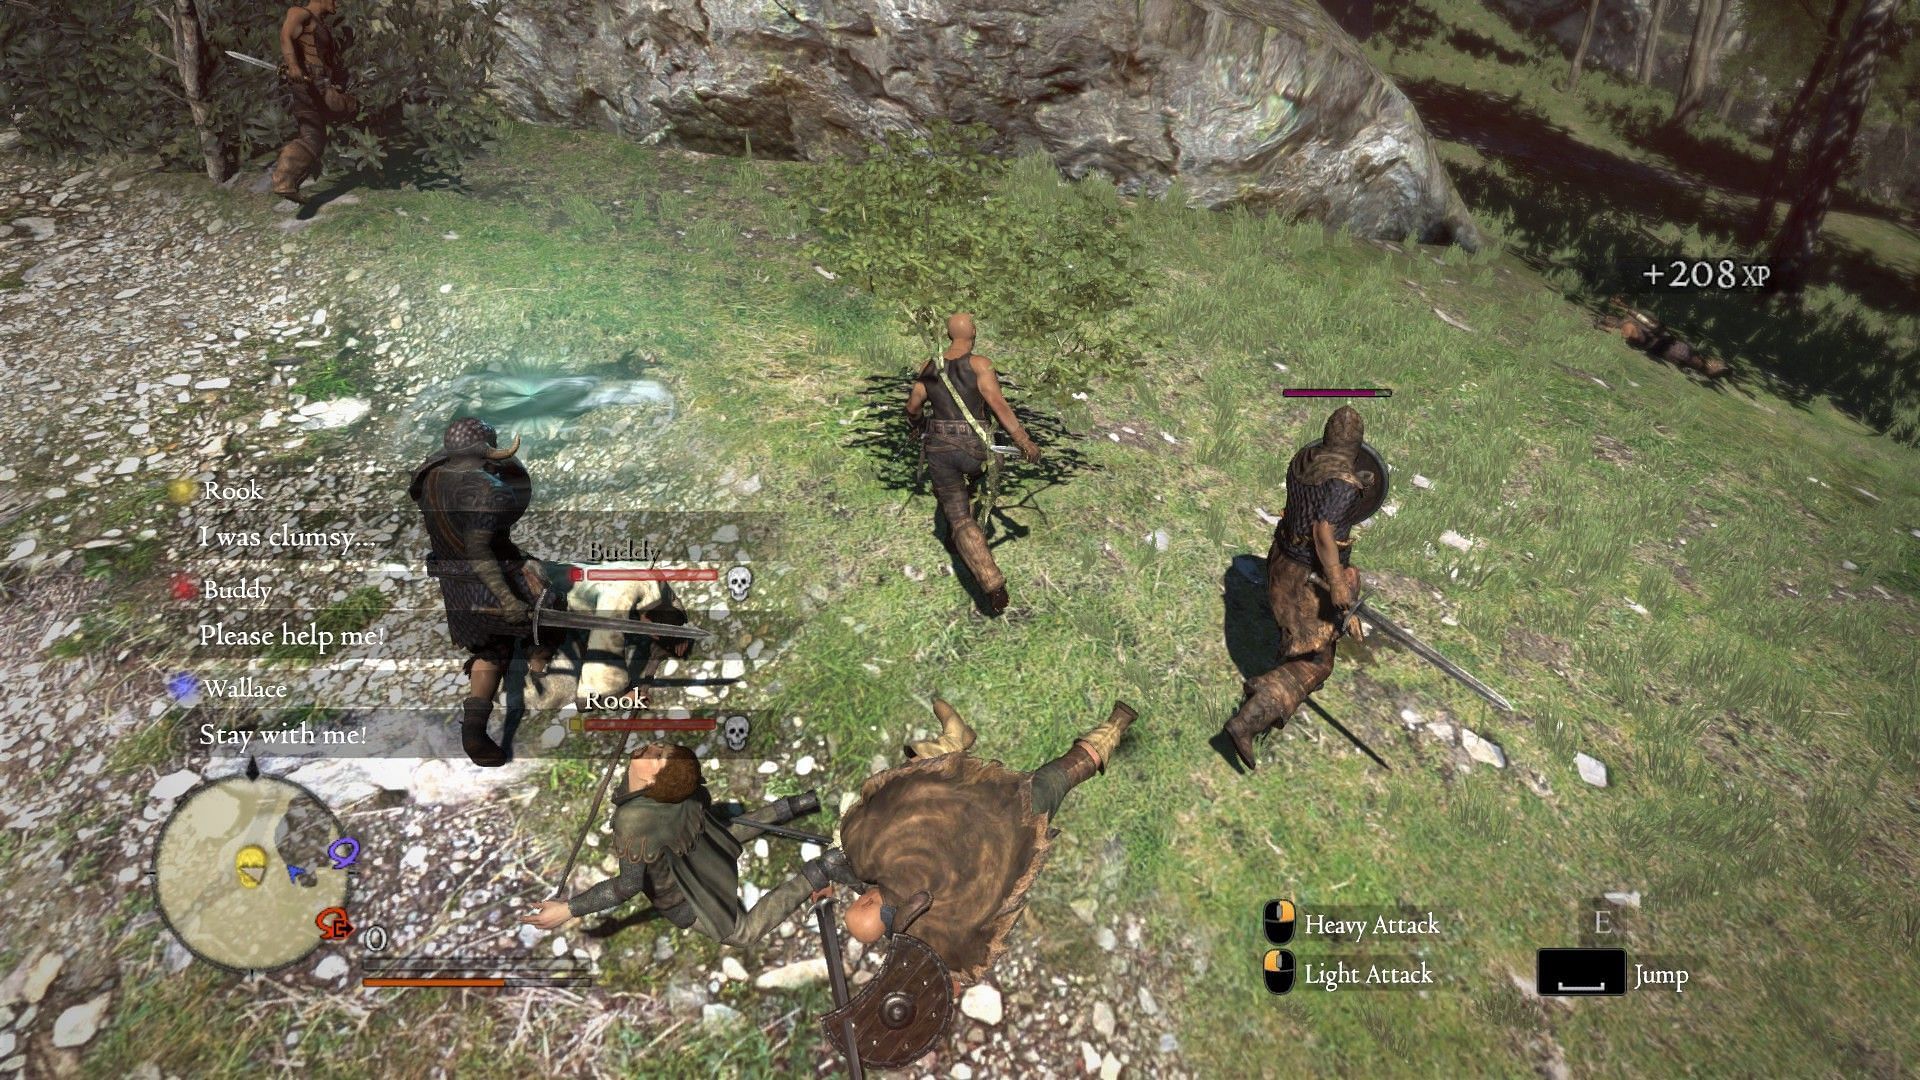 Strap in for a rough ride (screenshot from Dragon's Dogma)